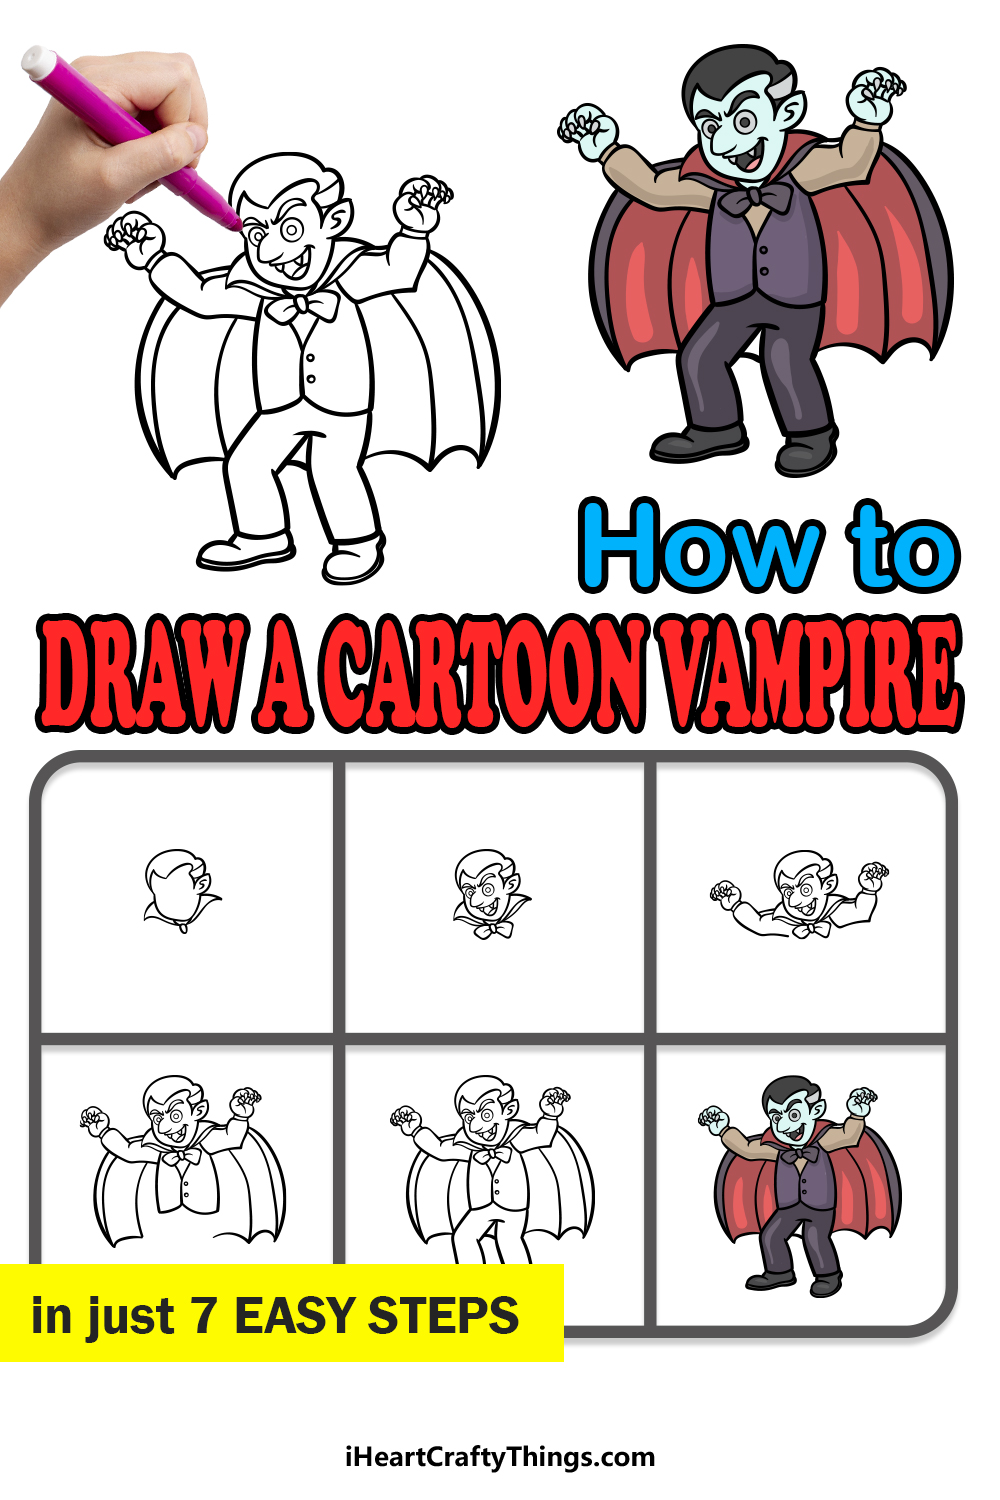 how to draw a cartoon vampire in 7 easy steps